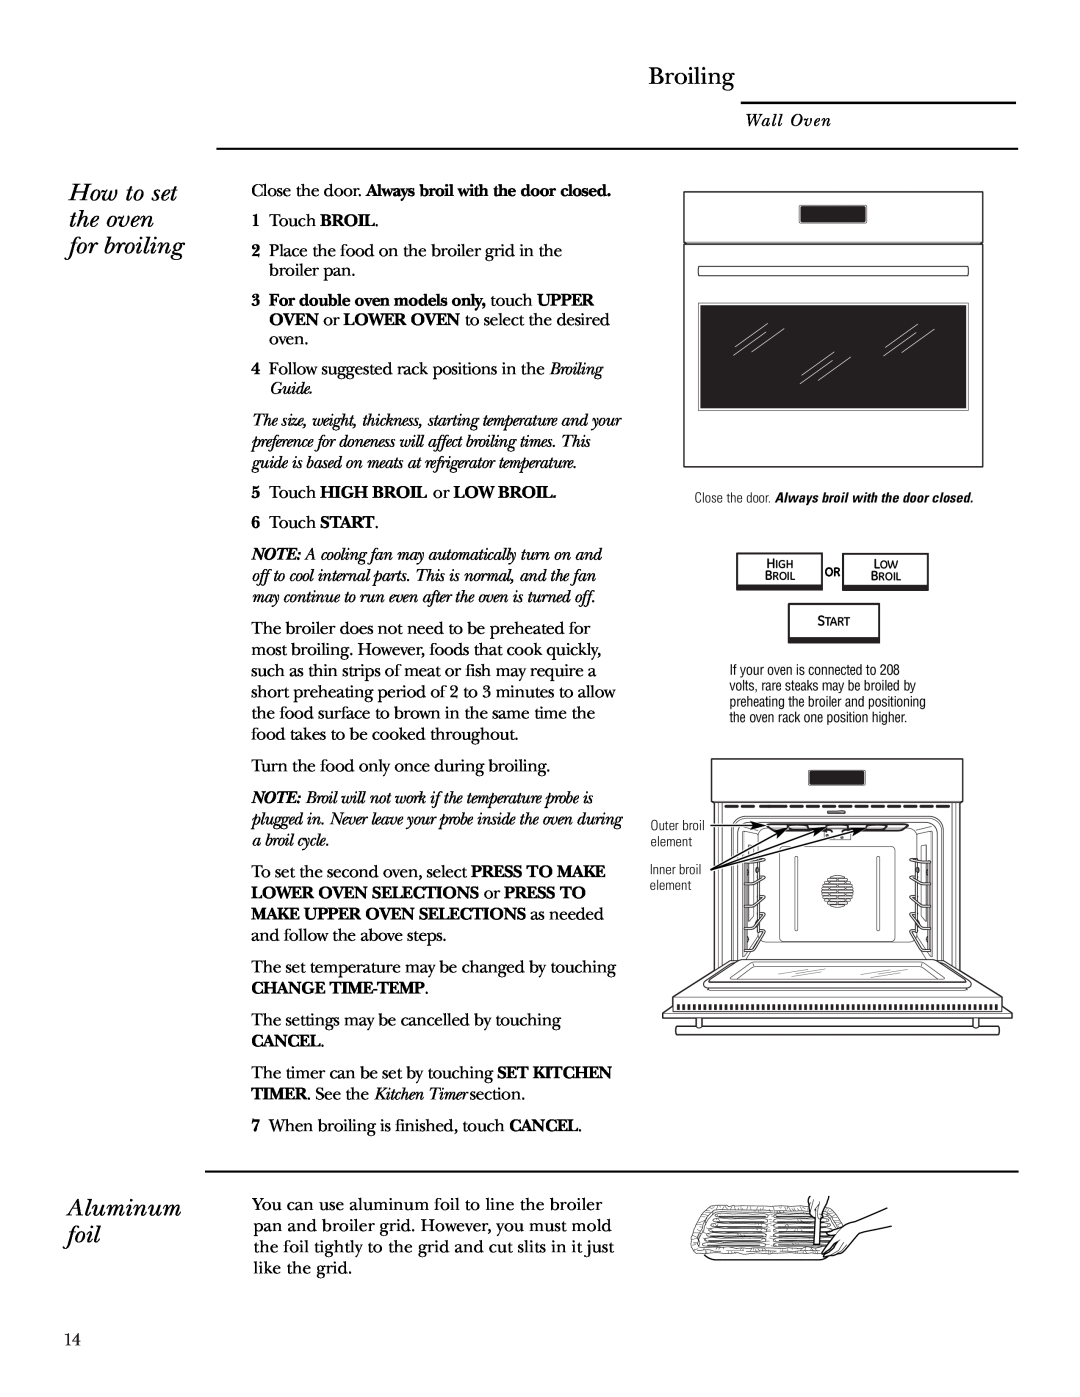 GE ZET2R, ZET1R owner manual Broiling, How to set the oven for broiling, Aluminum foil 